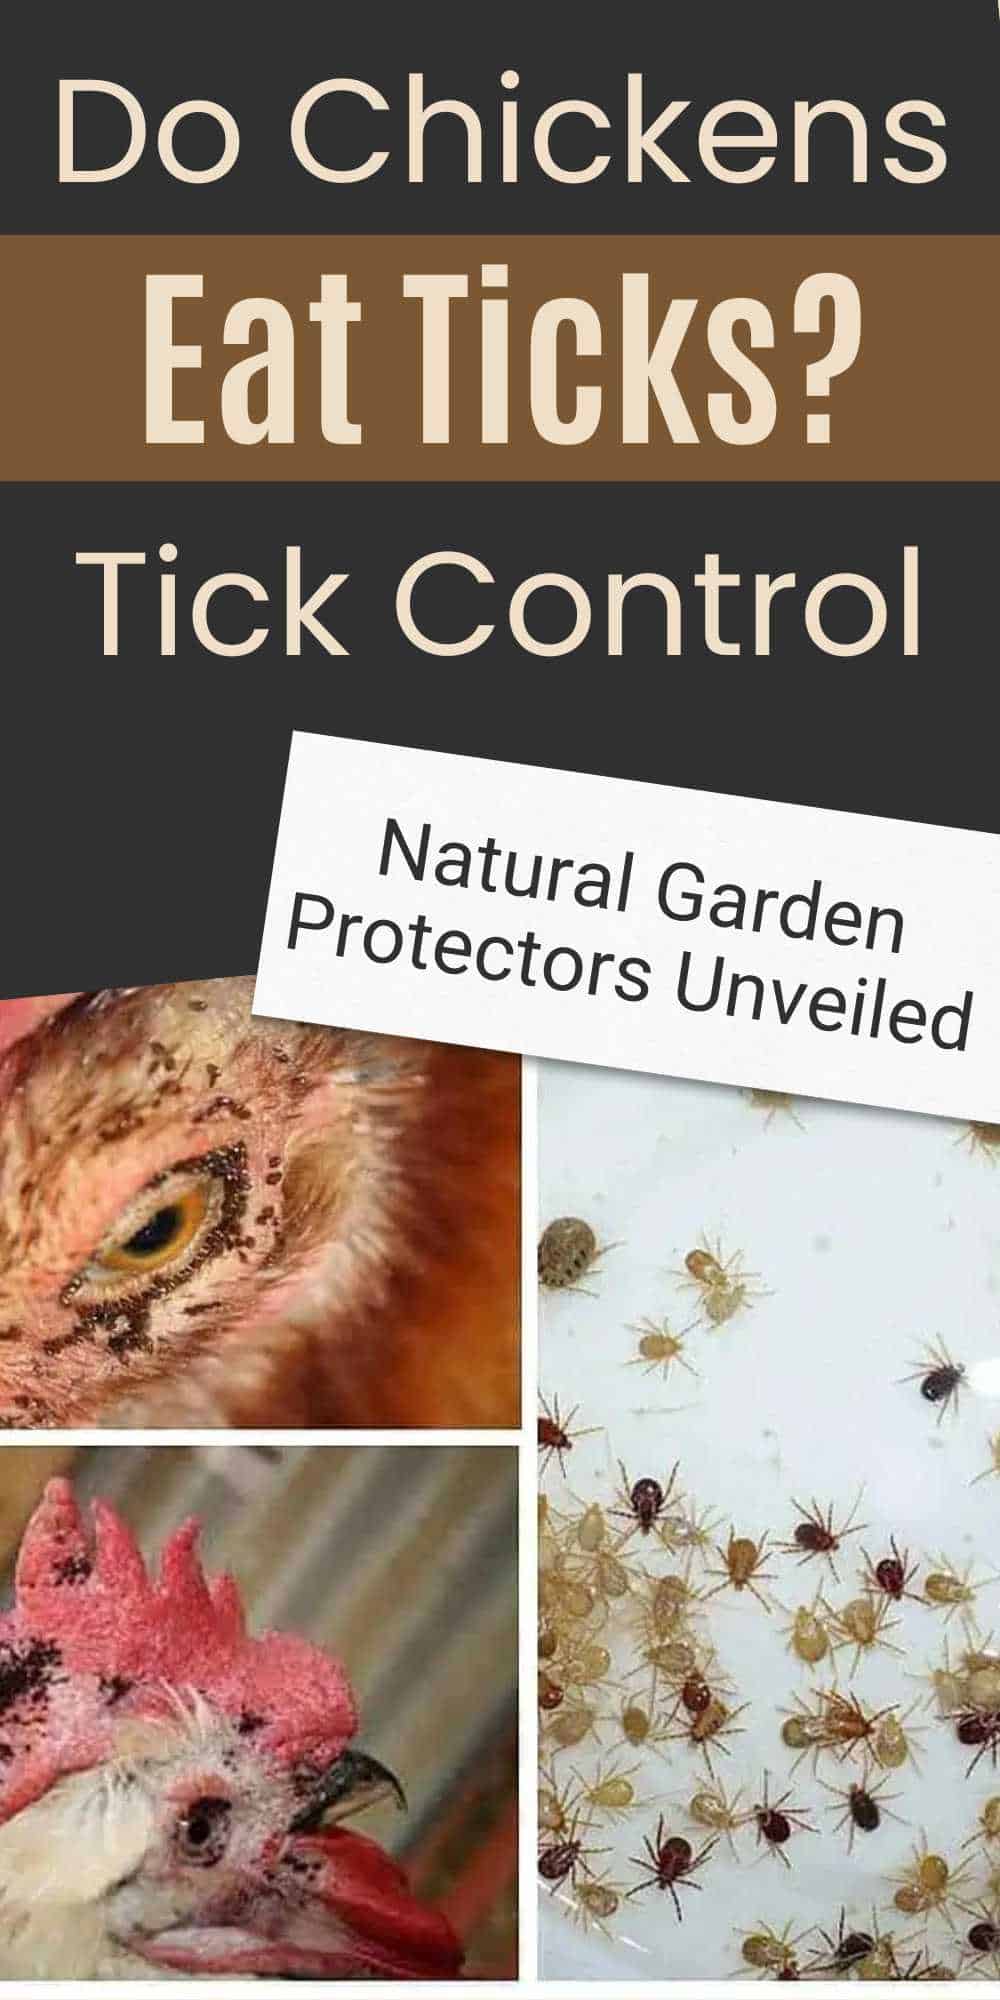 Do Chickens Eat Tick